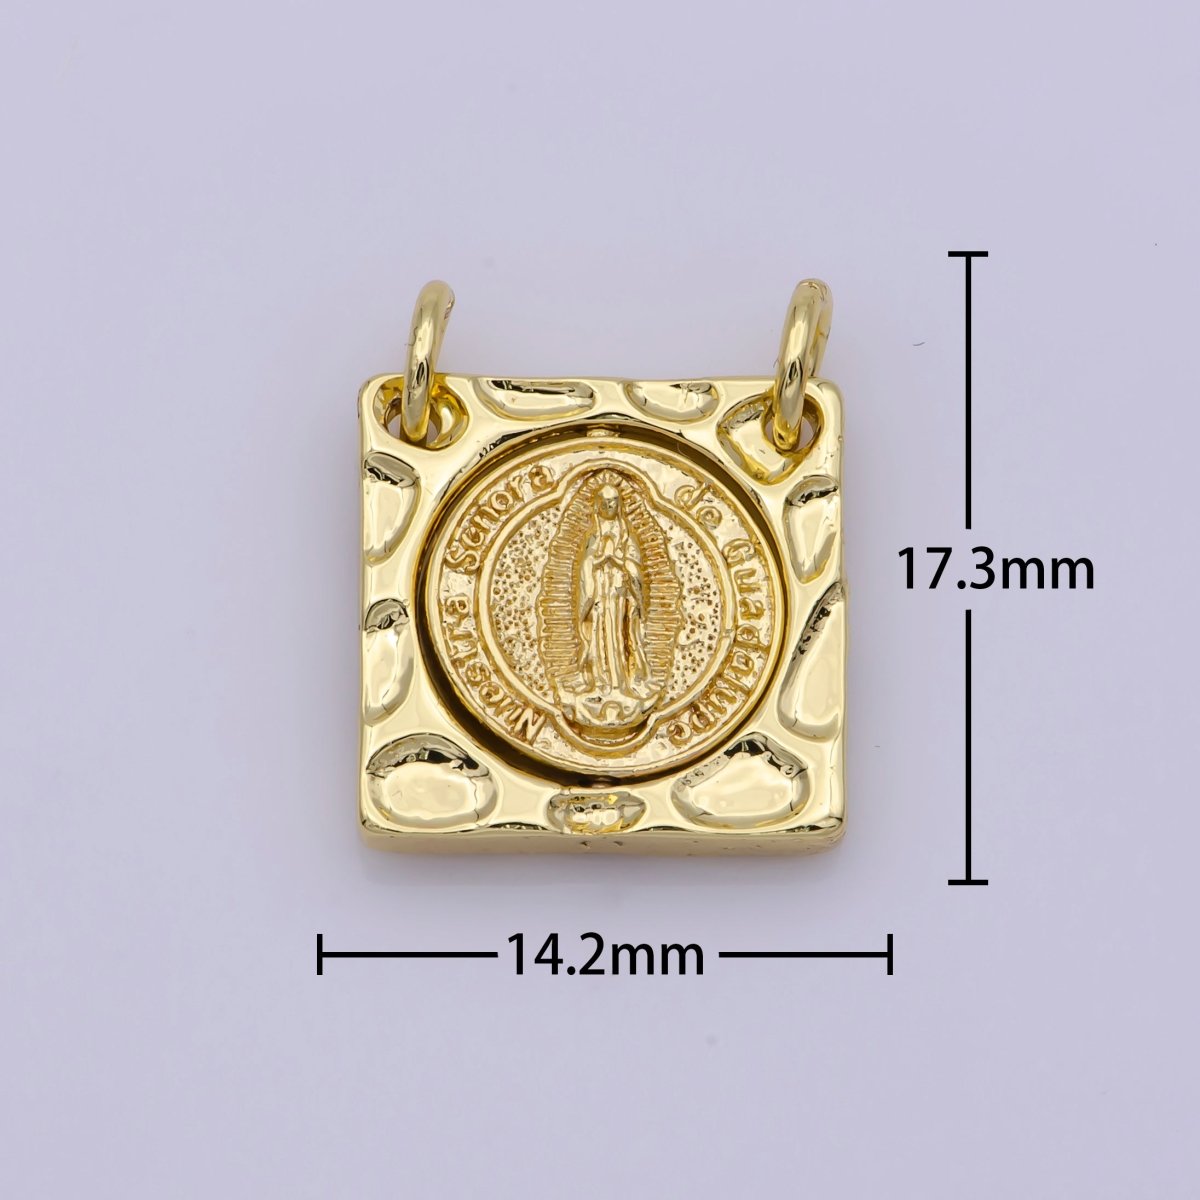 Dainty Vintage Square Lady Guadalupe Charm Religious Medallion Necklace Pendant Virgin Mary for Jewelry Making G-875 - DLUXCA